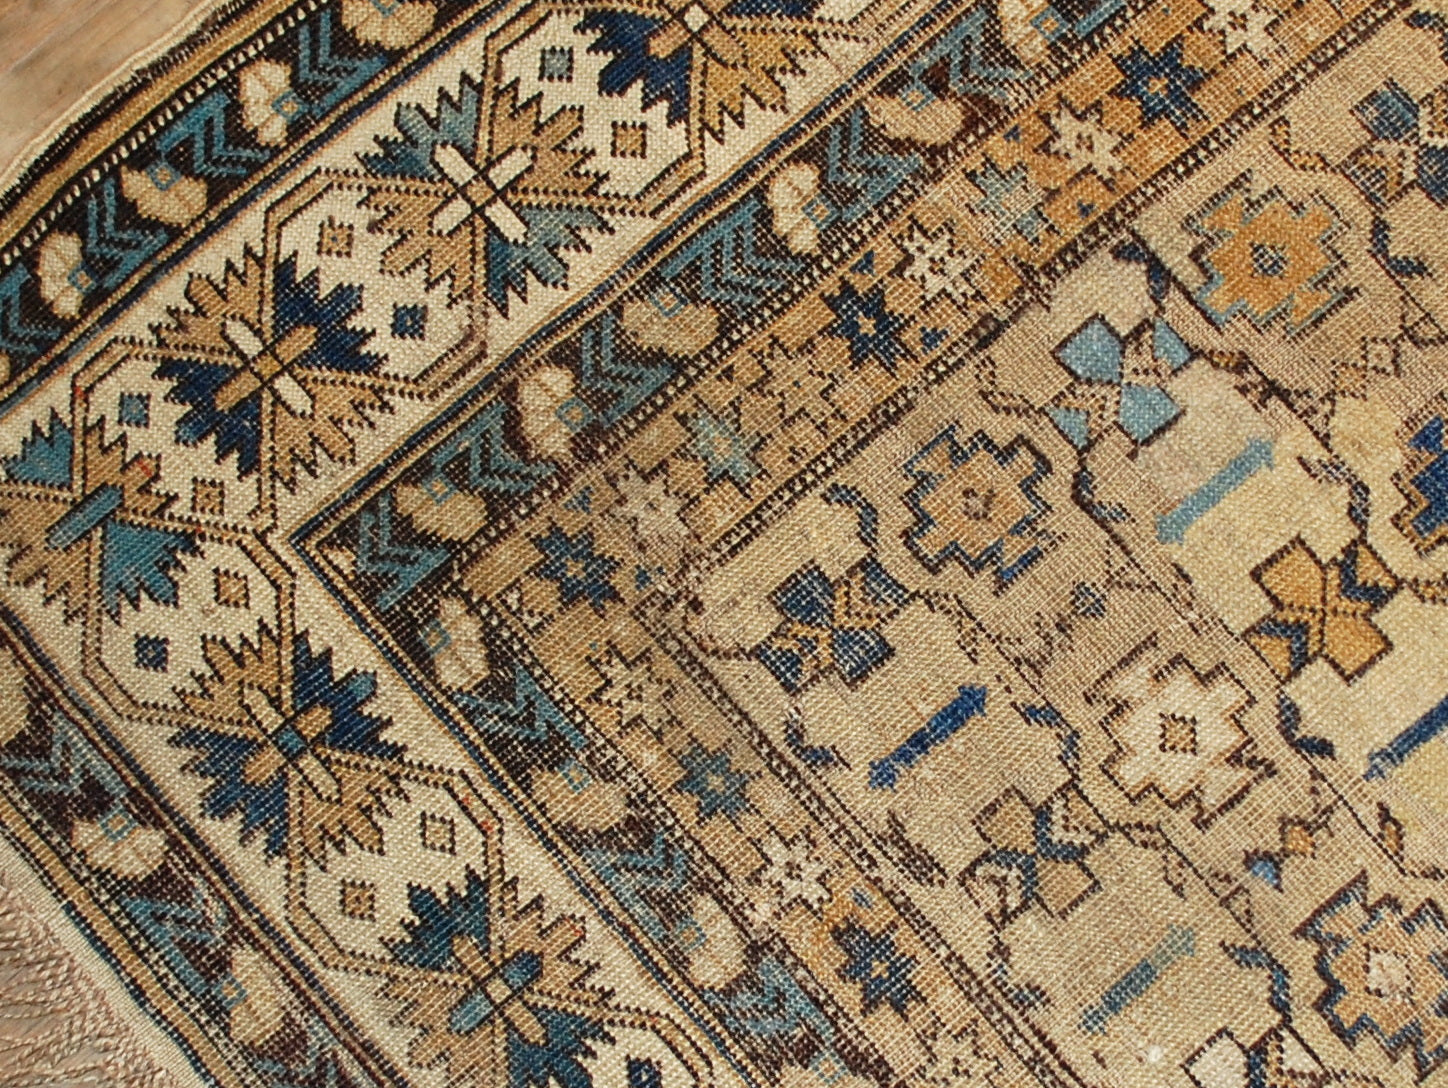 Antique hand made Caucasian Shirvan rug in original condition, it has some low pile. The rug is in light shades of brown, beige and azure colors.